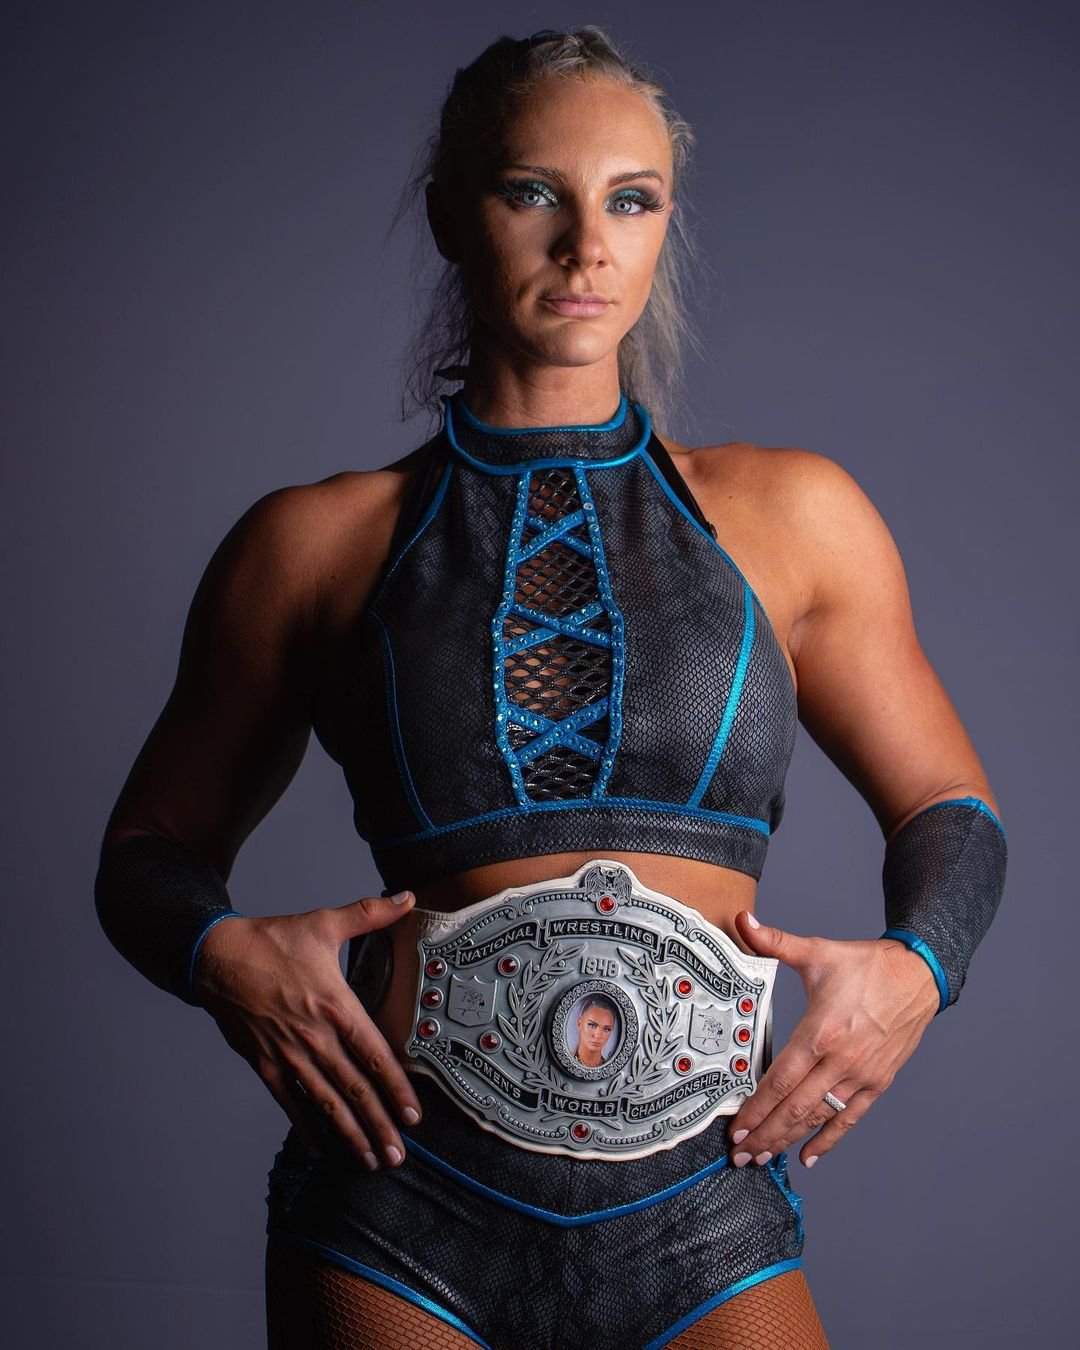 Congratulations to Kamille Brickhouse for winning the NWA Women's ...